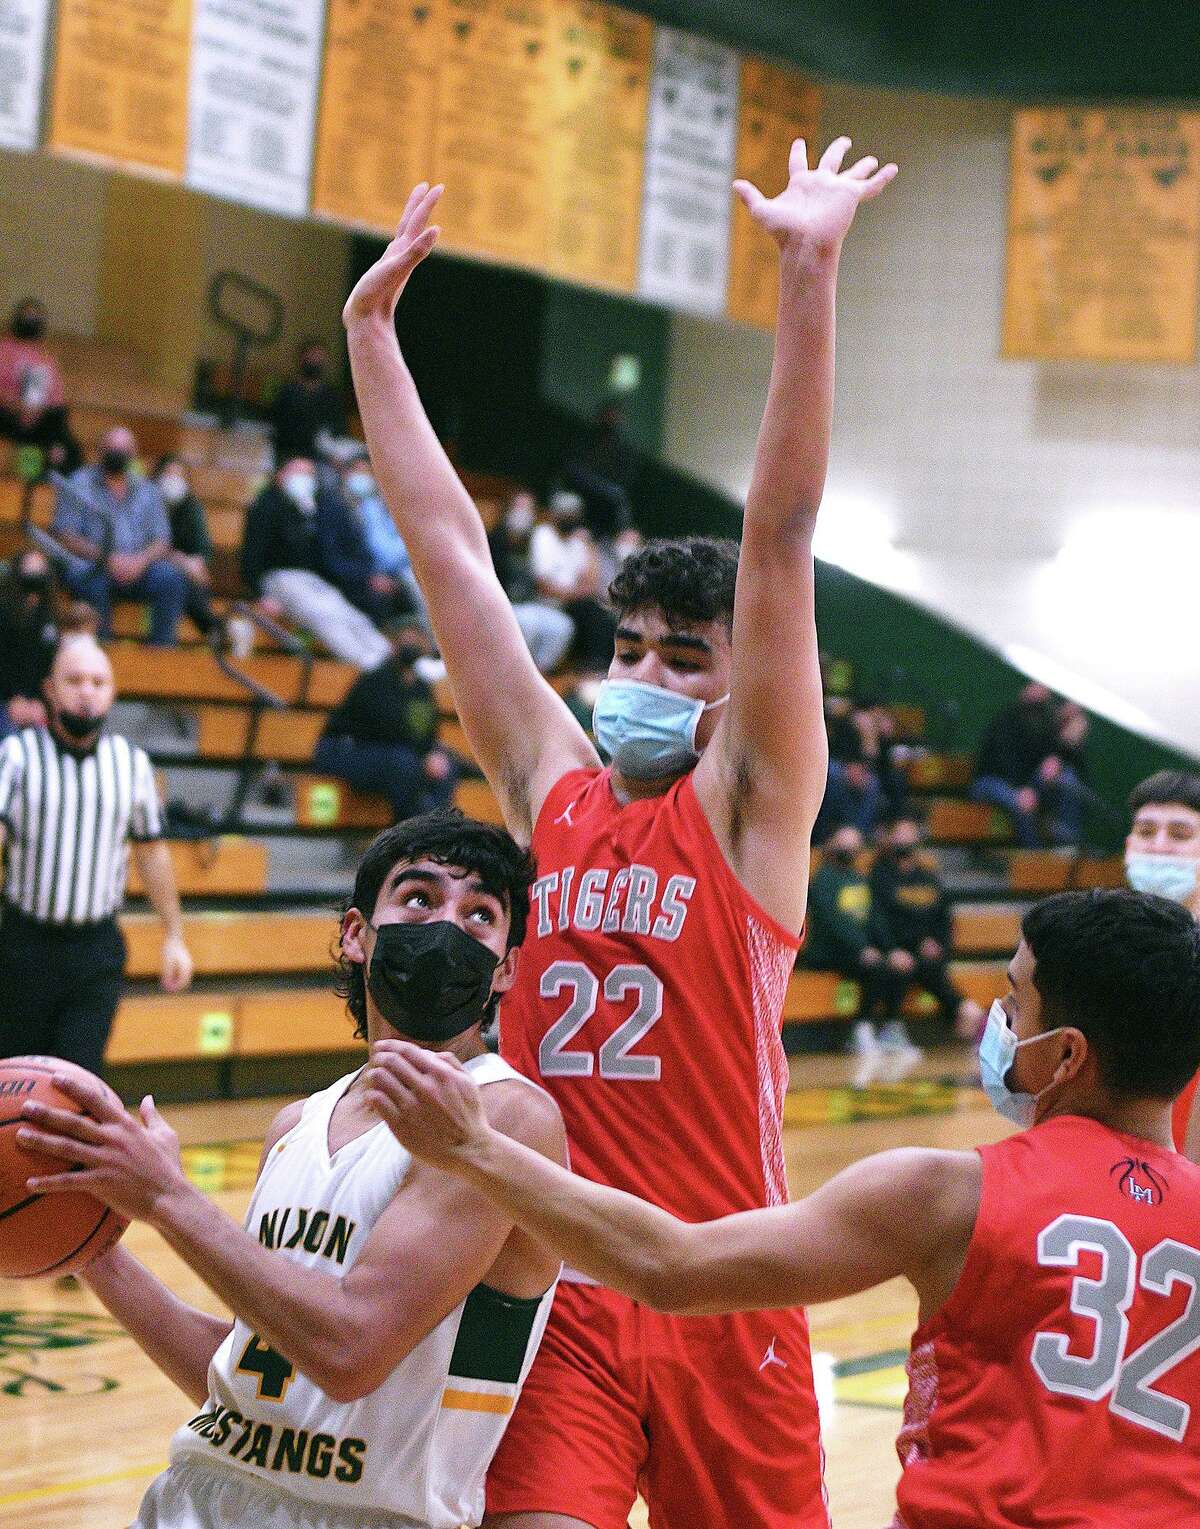 Juan Marines controls the ball for the Nixon Mustangs as Elijah Becker and Brandon Villarreal defend for the Martin Tigers Tuesday, December 15, 2020 at Nixon. Becker returned from COVID-19 protocols Tuesday.